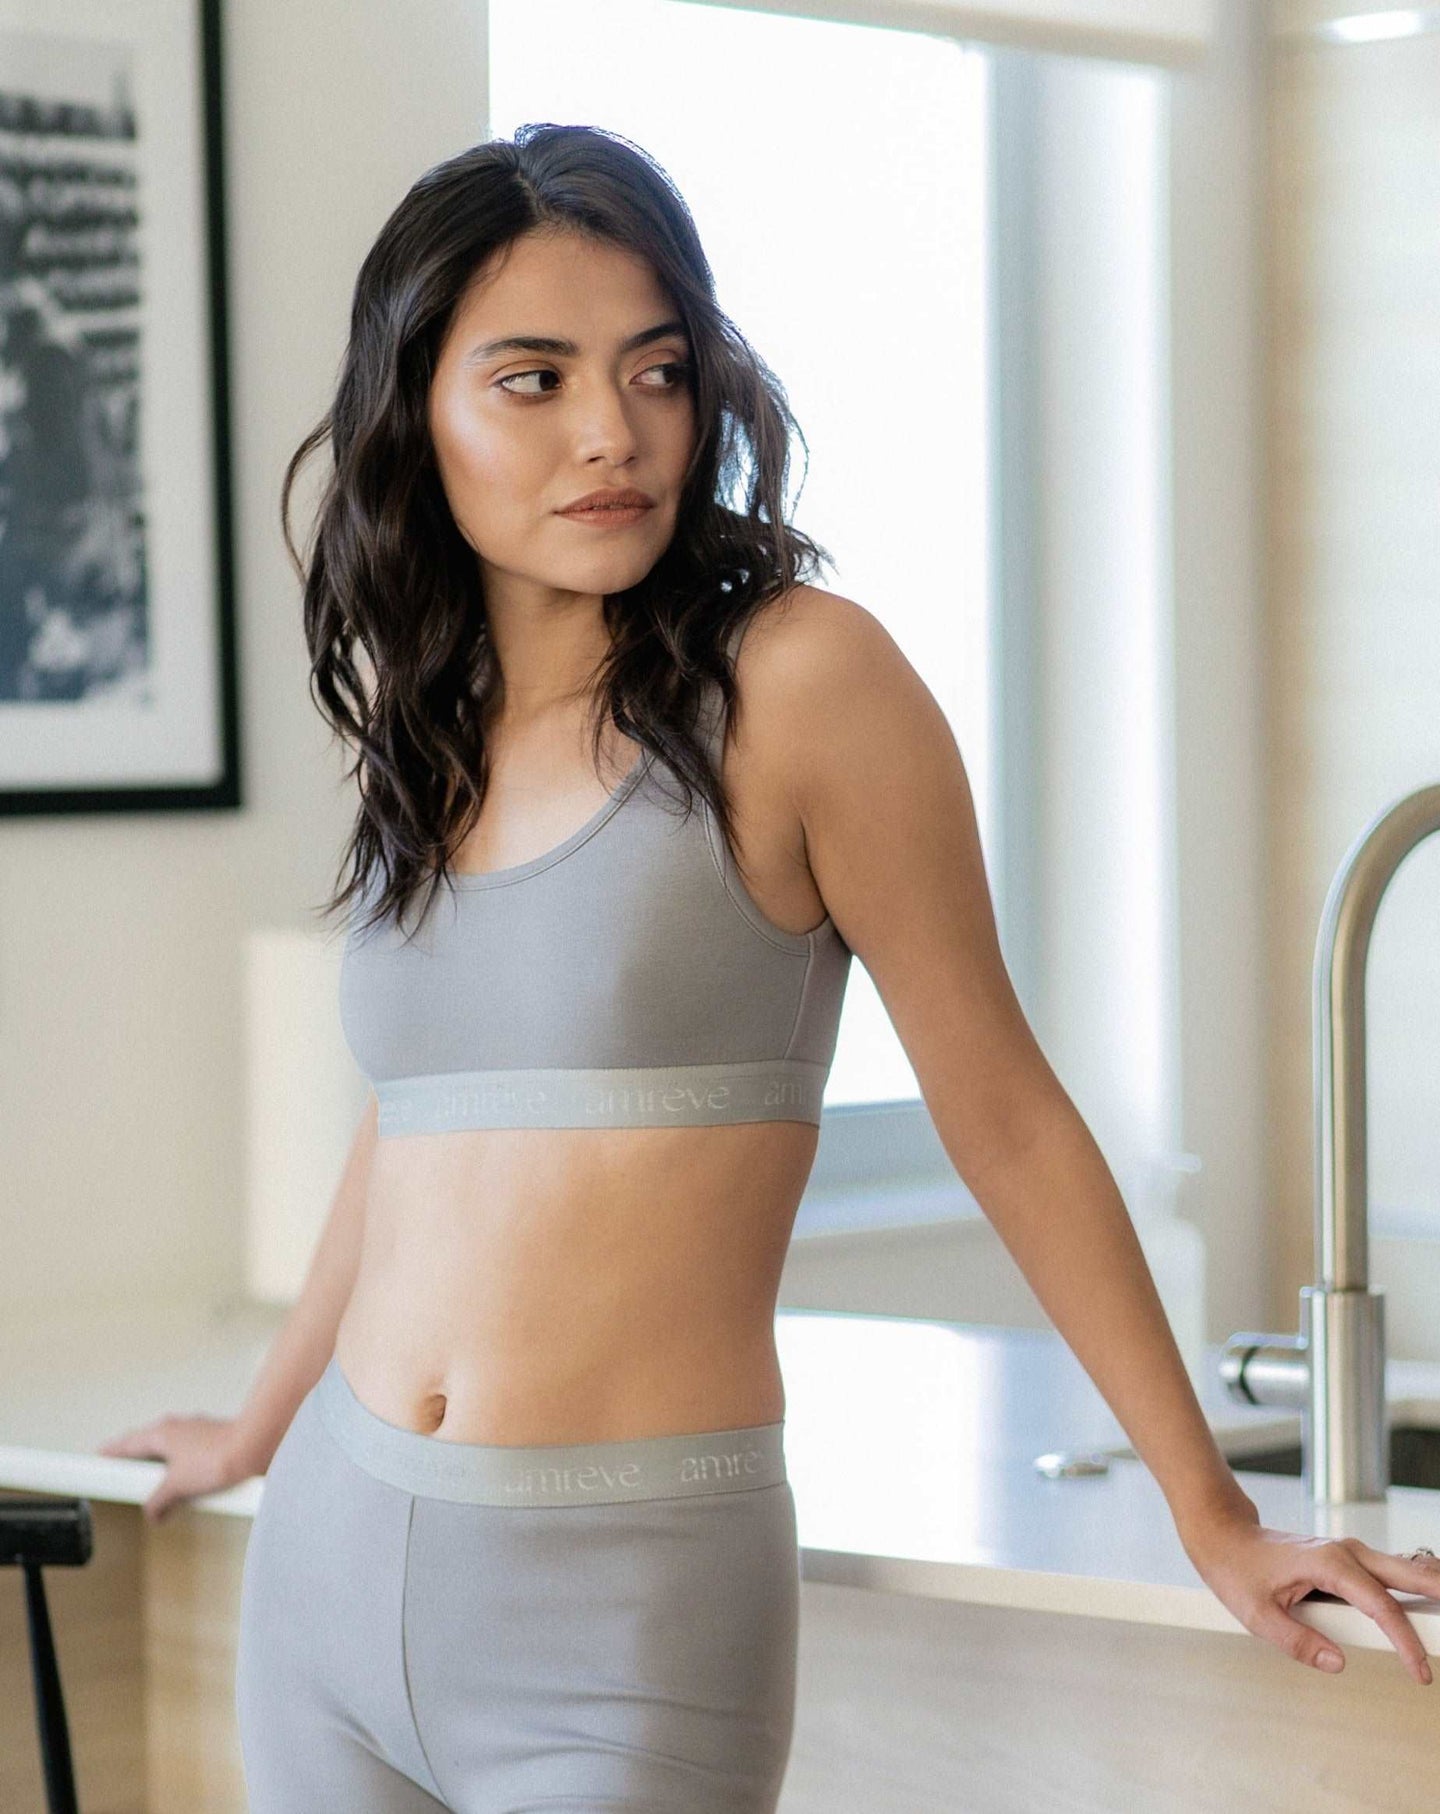 Photo of a woman wearing amrêve organic pima cotton bralette and bike shorts in grey leaning on the kitchen counter.